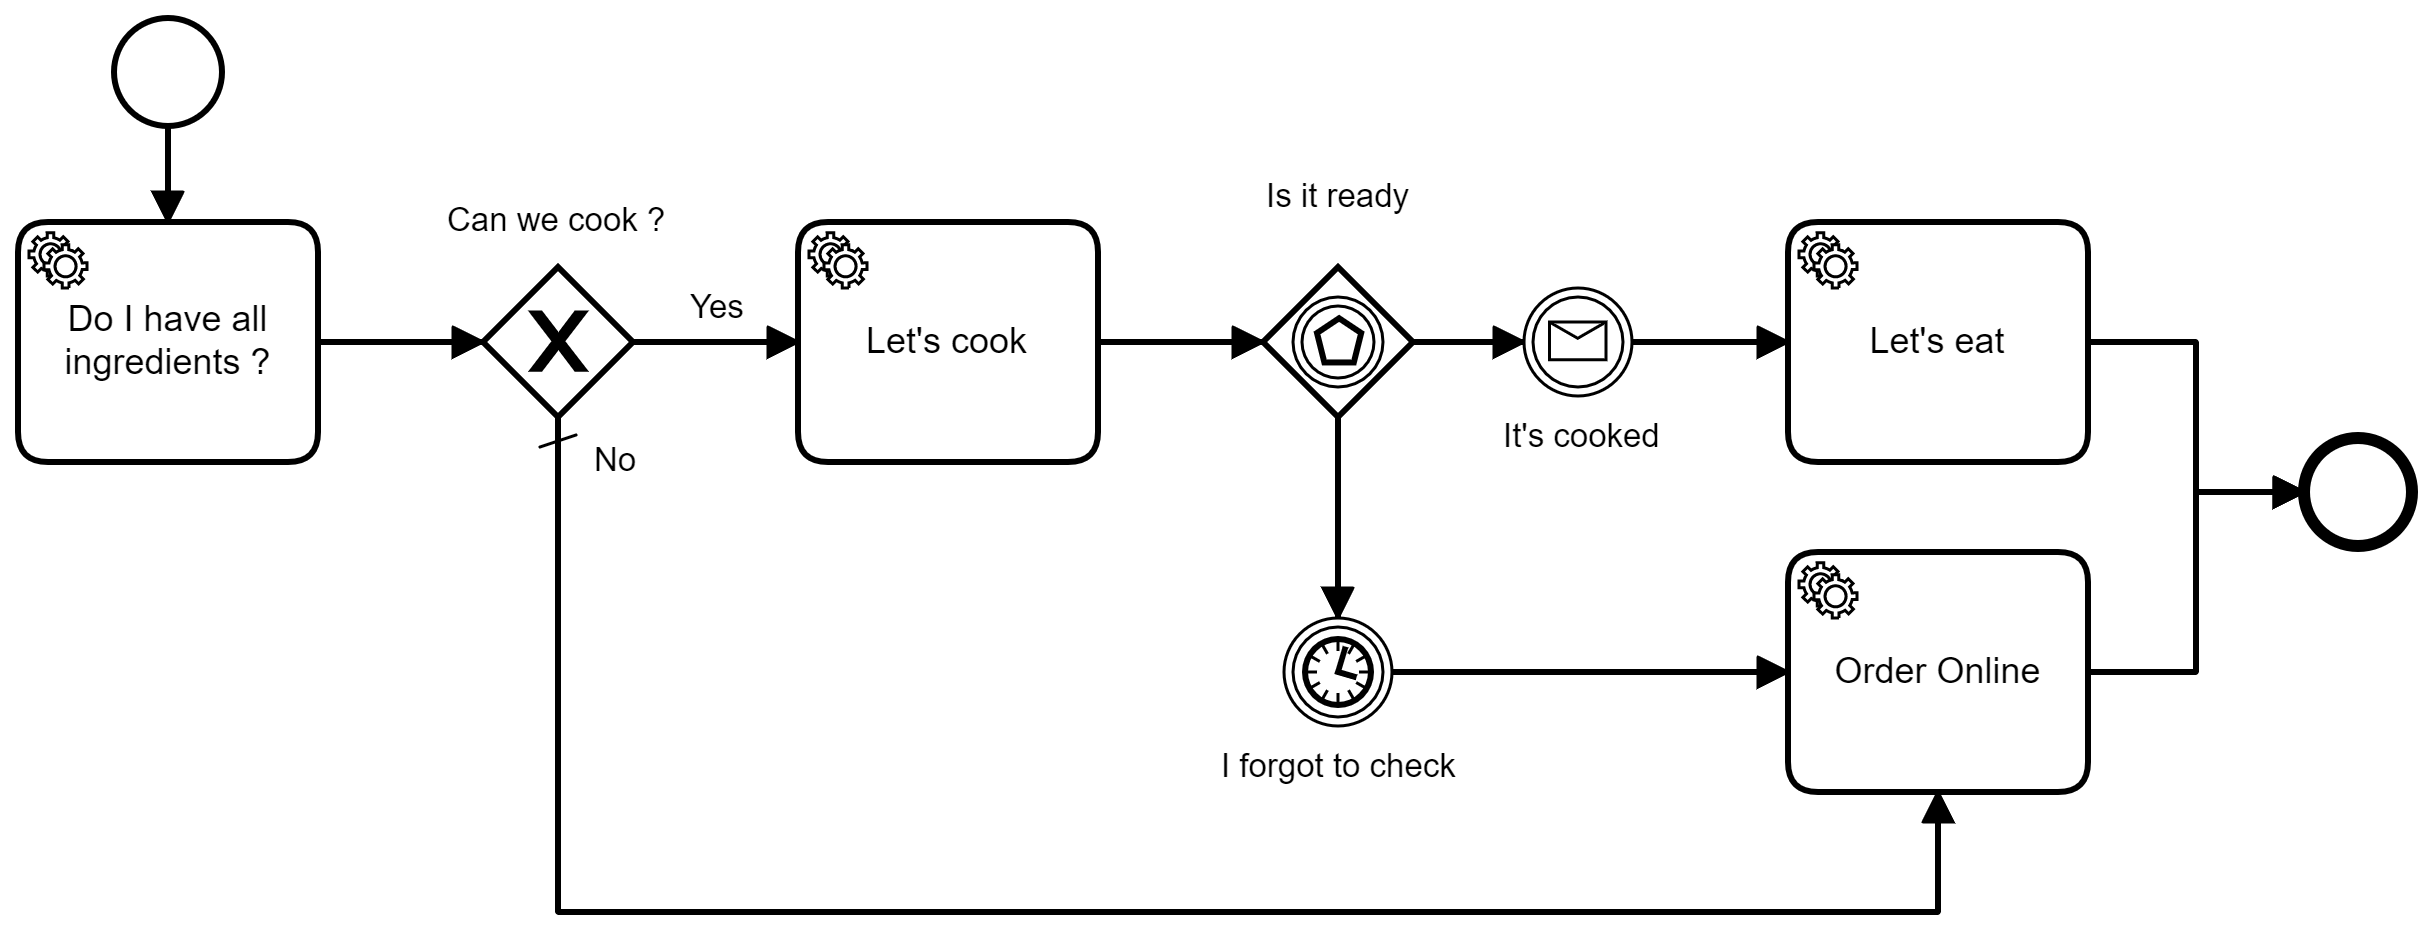 Noodles Cooking Workflow Process